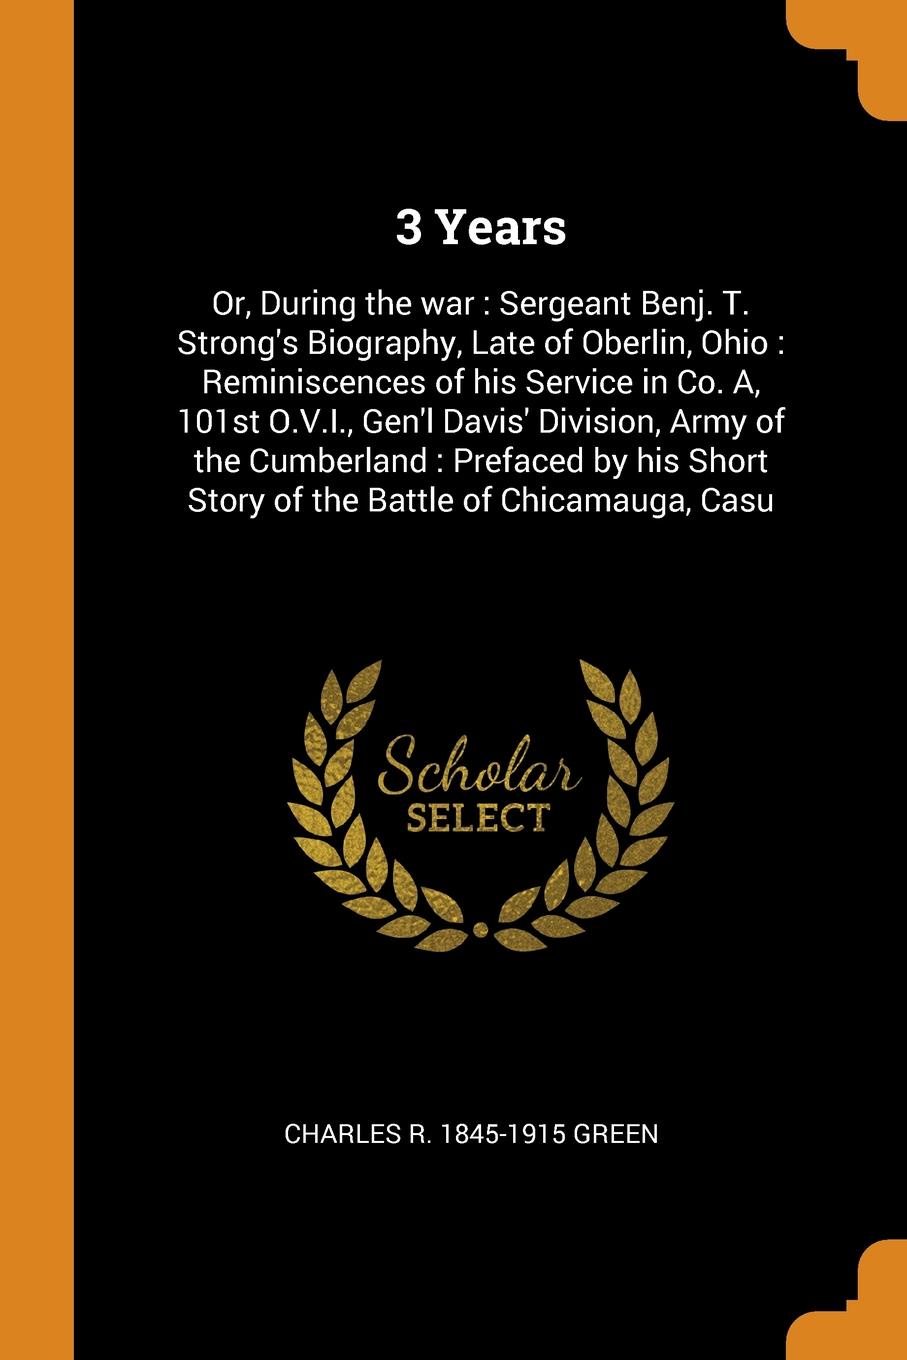 3 Years. Or, During the war : Sergeant Benj. T. Strong`s Biography, Late of Oberlin, Ohio : Reminiscences of his Service in Co. A, 101st O.V.I., Gen`l Davis` Division, Army of the Cumberland : Prefaced by his Short Story of the Battle of Chicamaug...